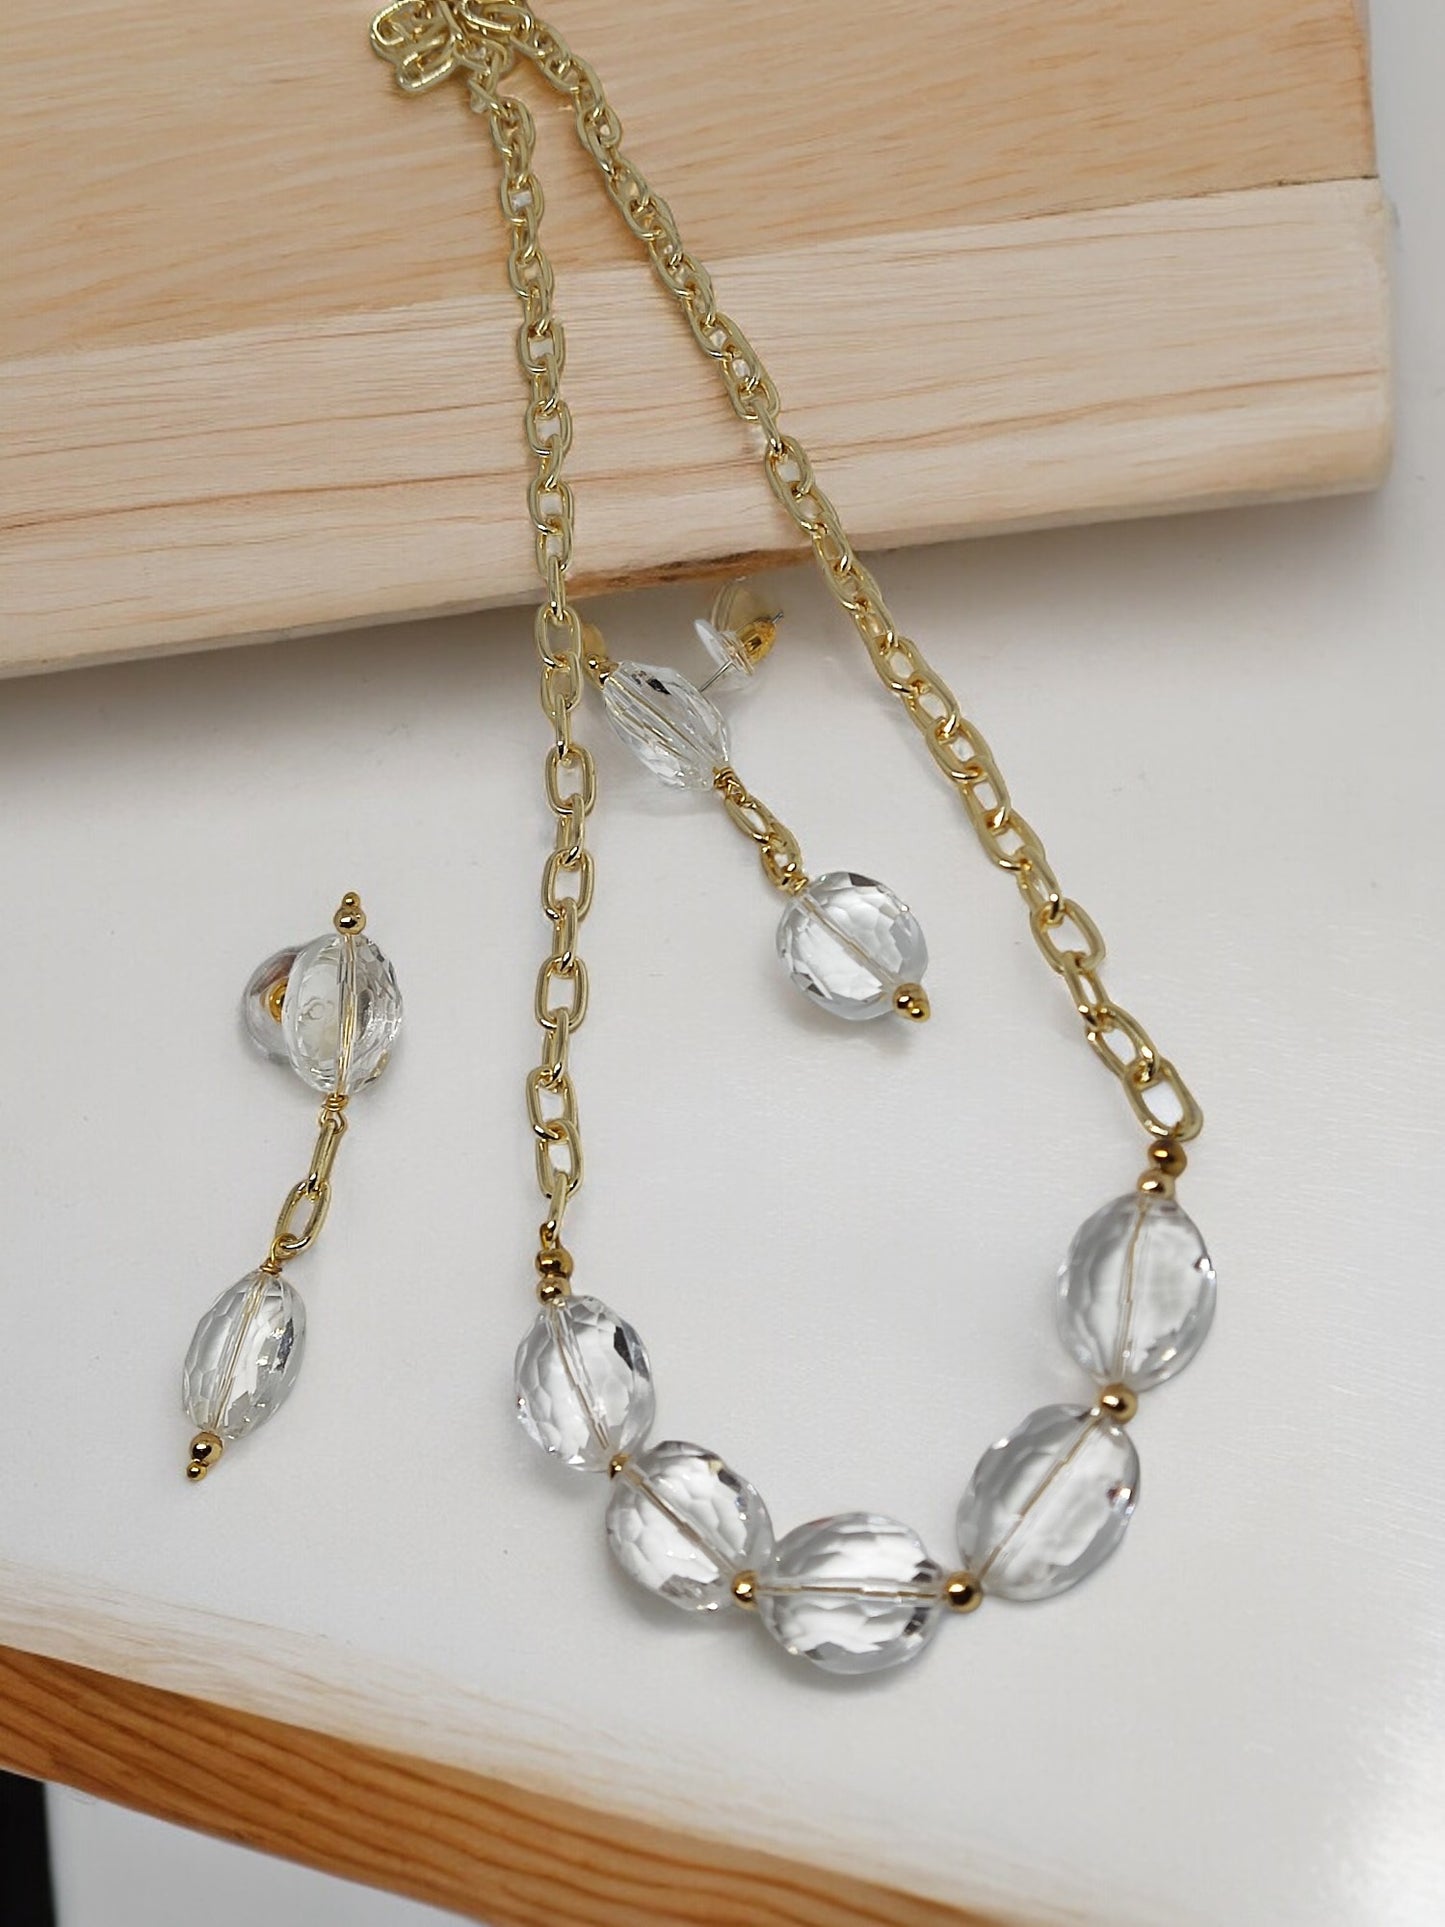 <p>Adorn your outfit with sophistication and luxury. Our Crystal Clear Set features glass crystal clear beads and a non-tarnish chain, perfect for any occasion. The adjustable hook allows for a comfortable and elegant fit, making this set a must-have for any woman's jewelry collection.</p>